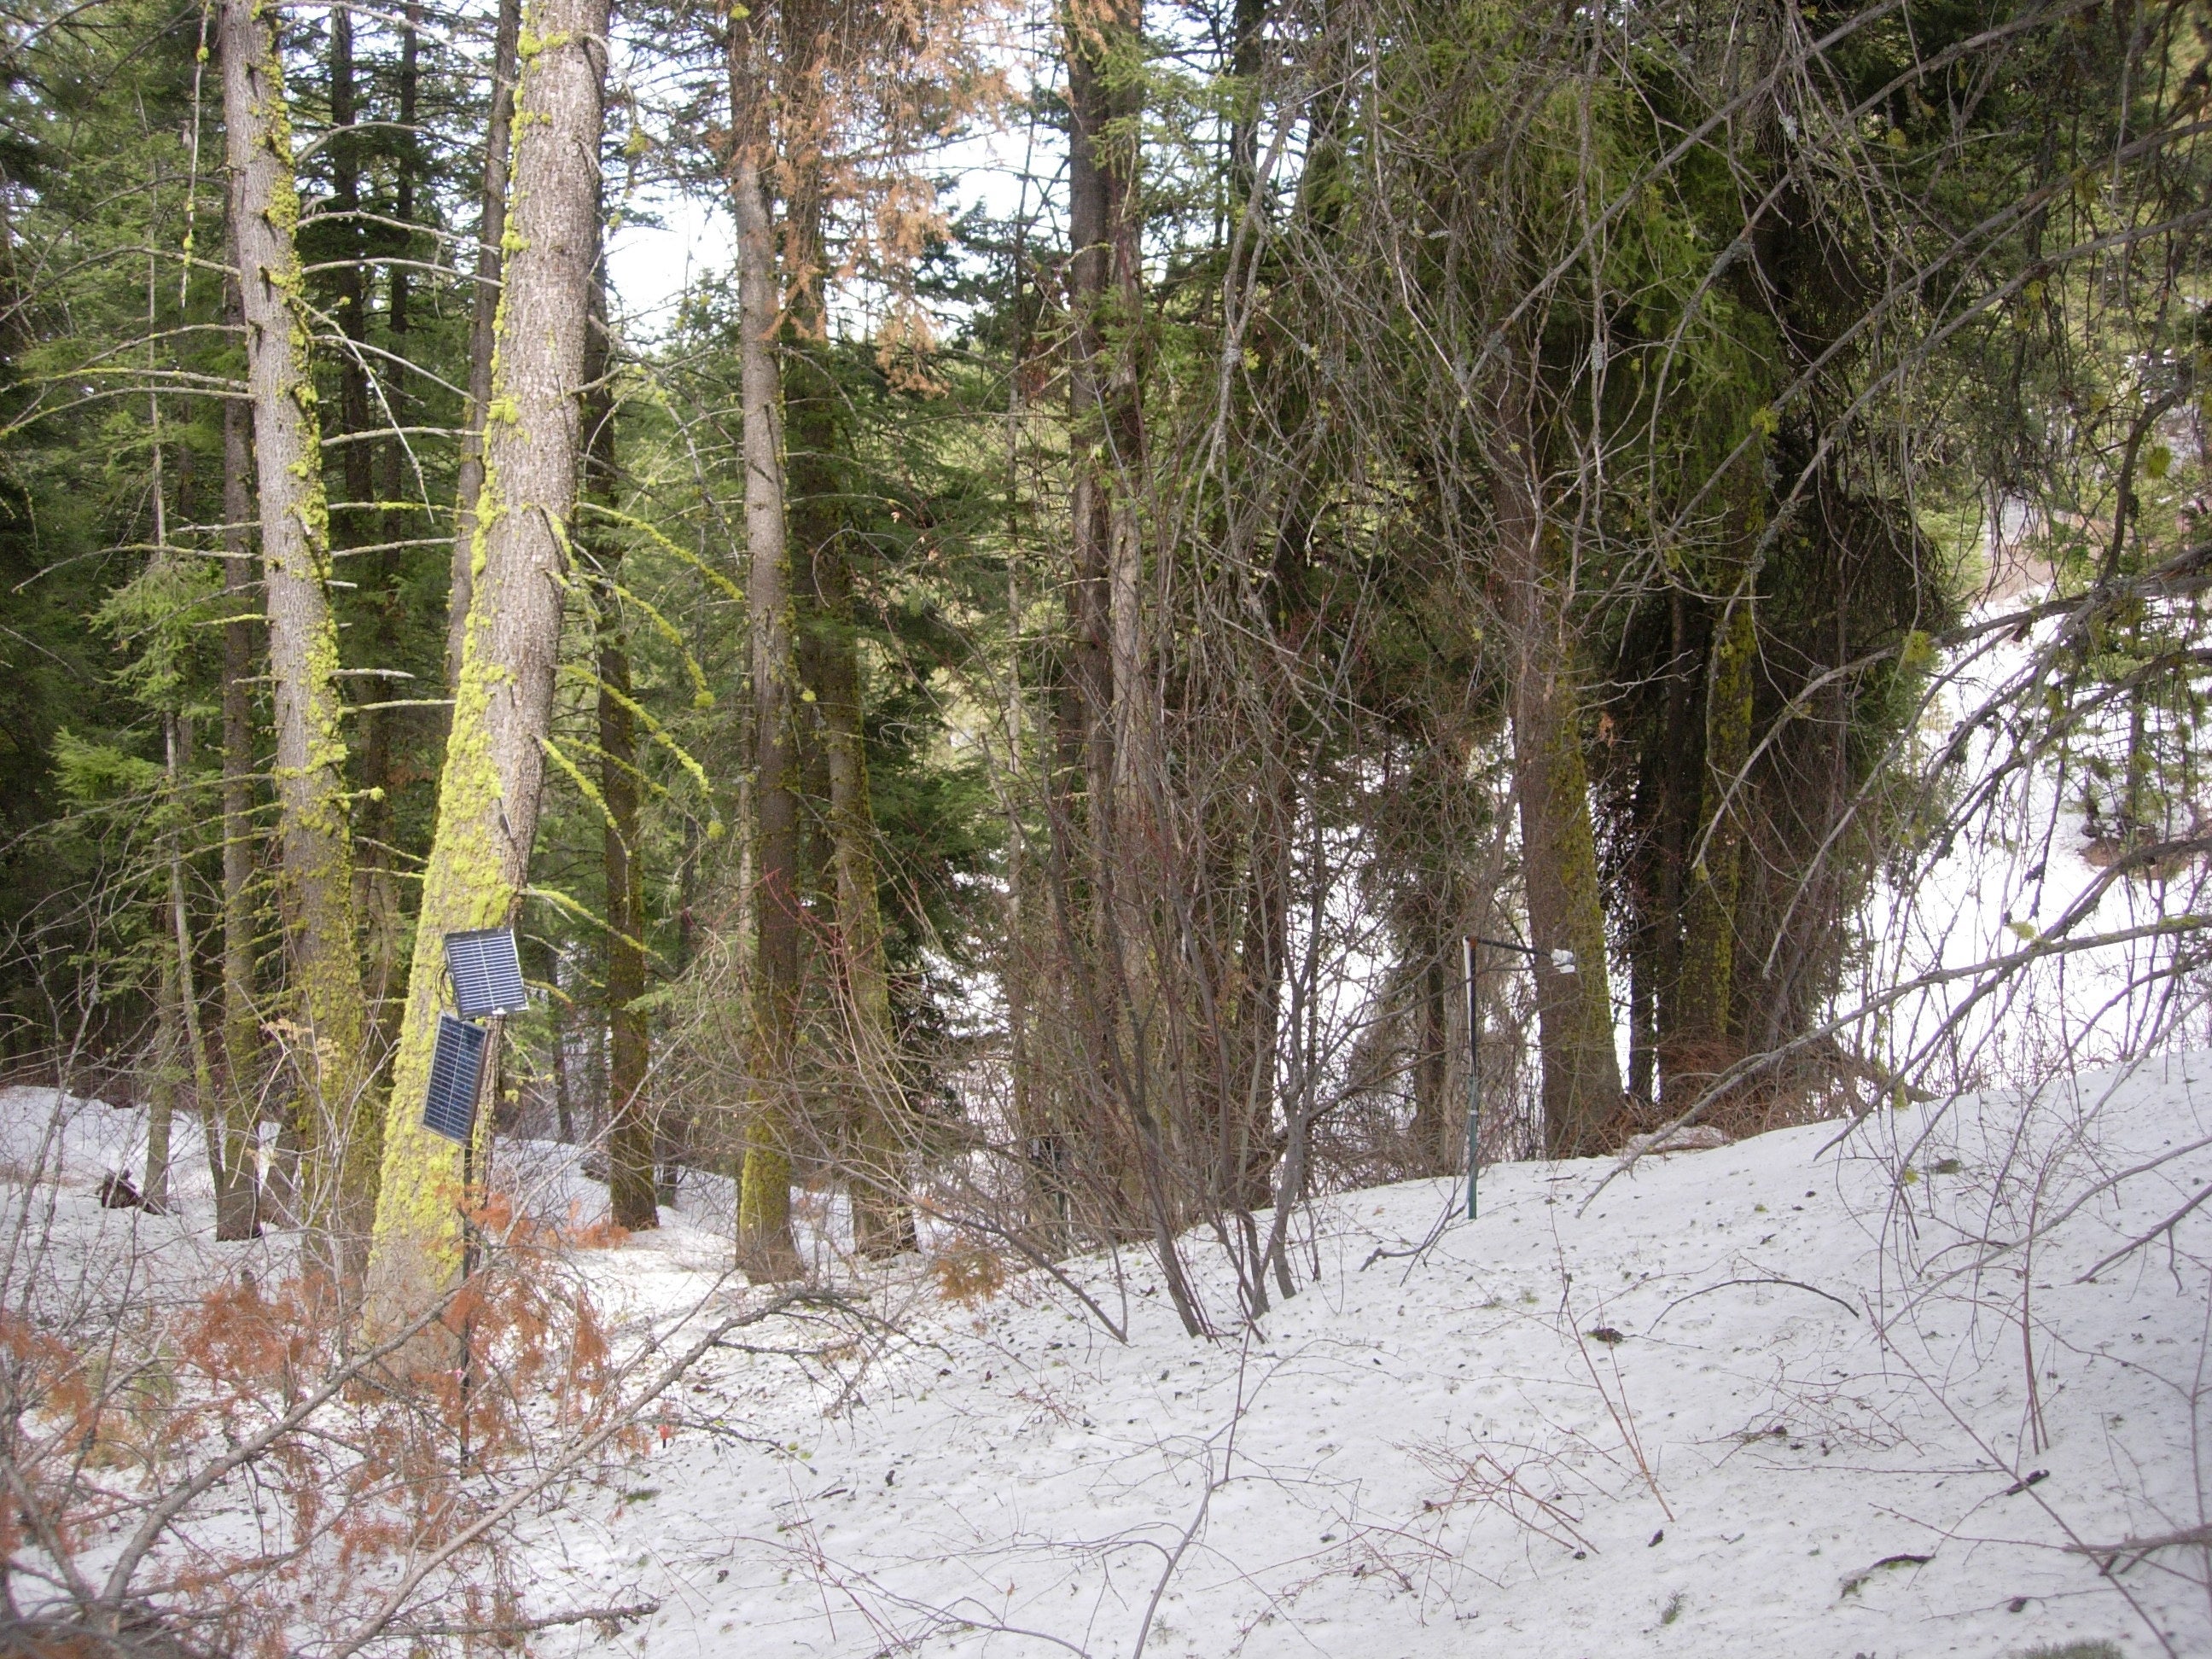 High N facing soil station sitting in a forest with snow on the ground.